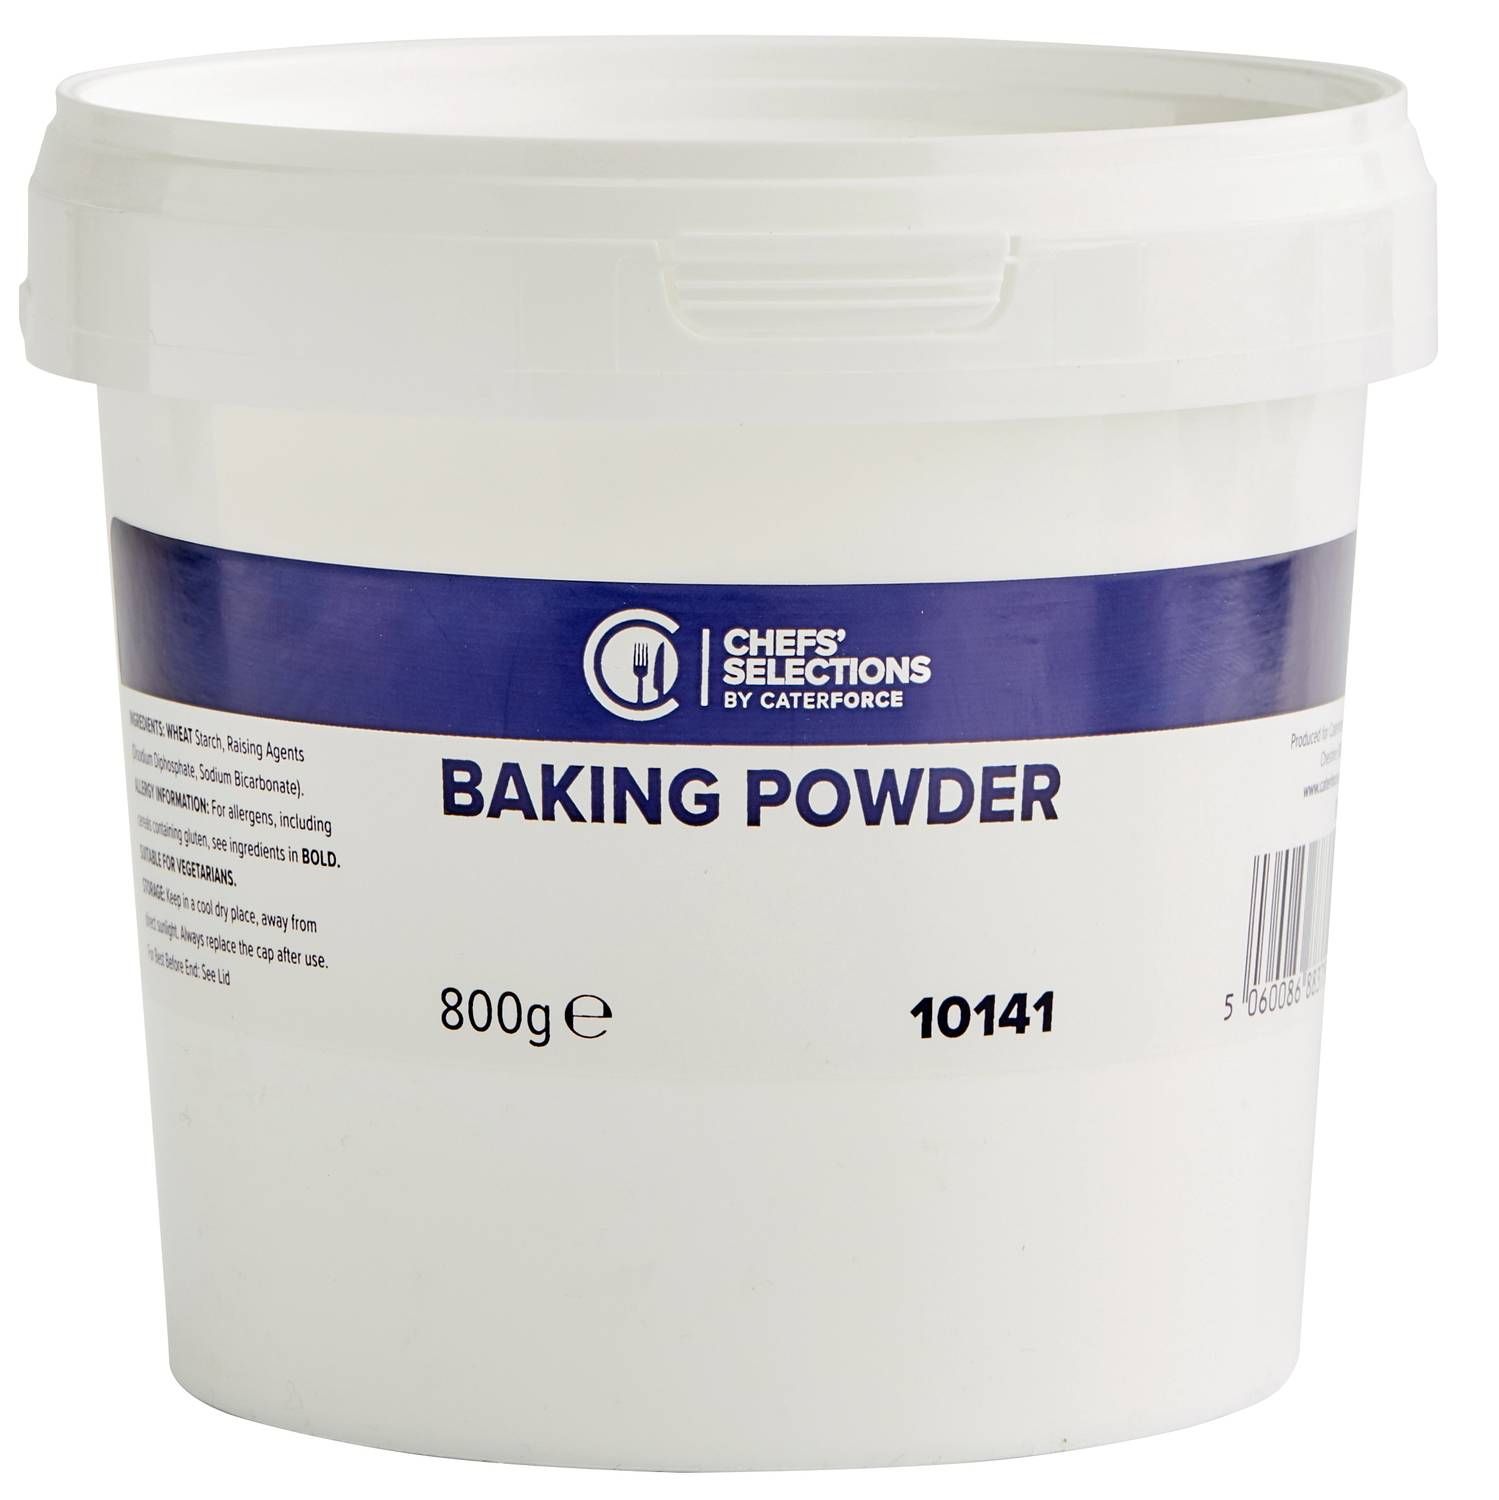 Chefs’ Selections Baking Powder (6 x 800g)